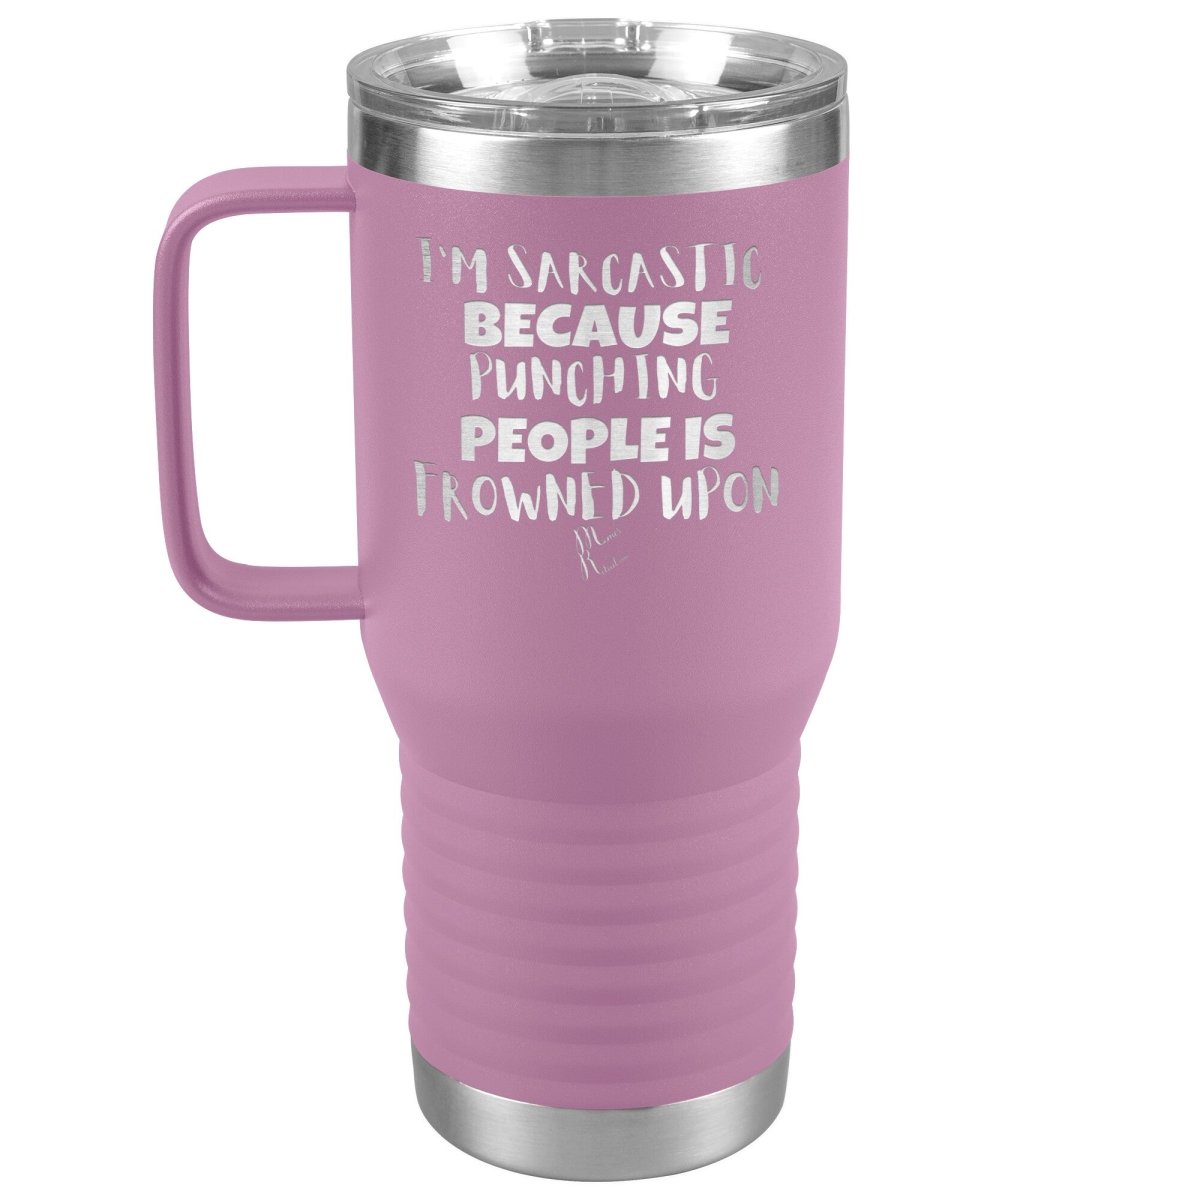 I'm Sarcastic Because Punching People is Frowned Upon Tumblers, 20oz Travel Tumbler / Light Purple - MemesRetail.com